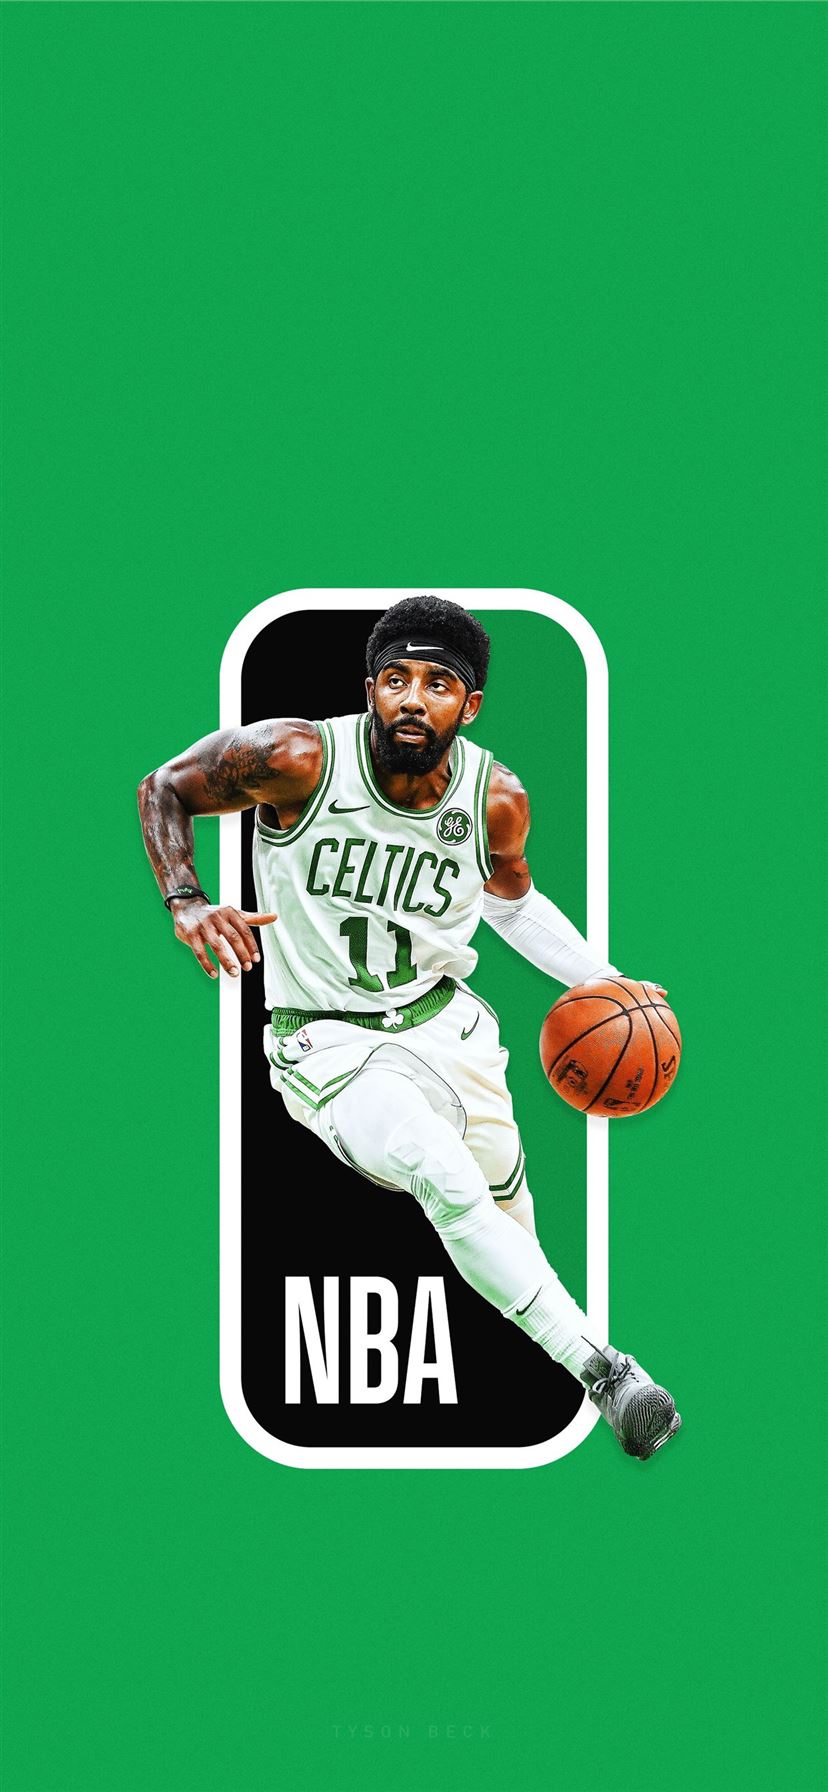 NBA Players Wallpaper  Apps on Google Play